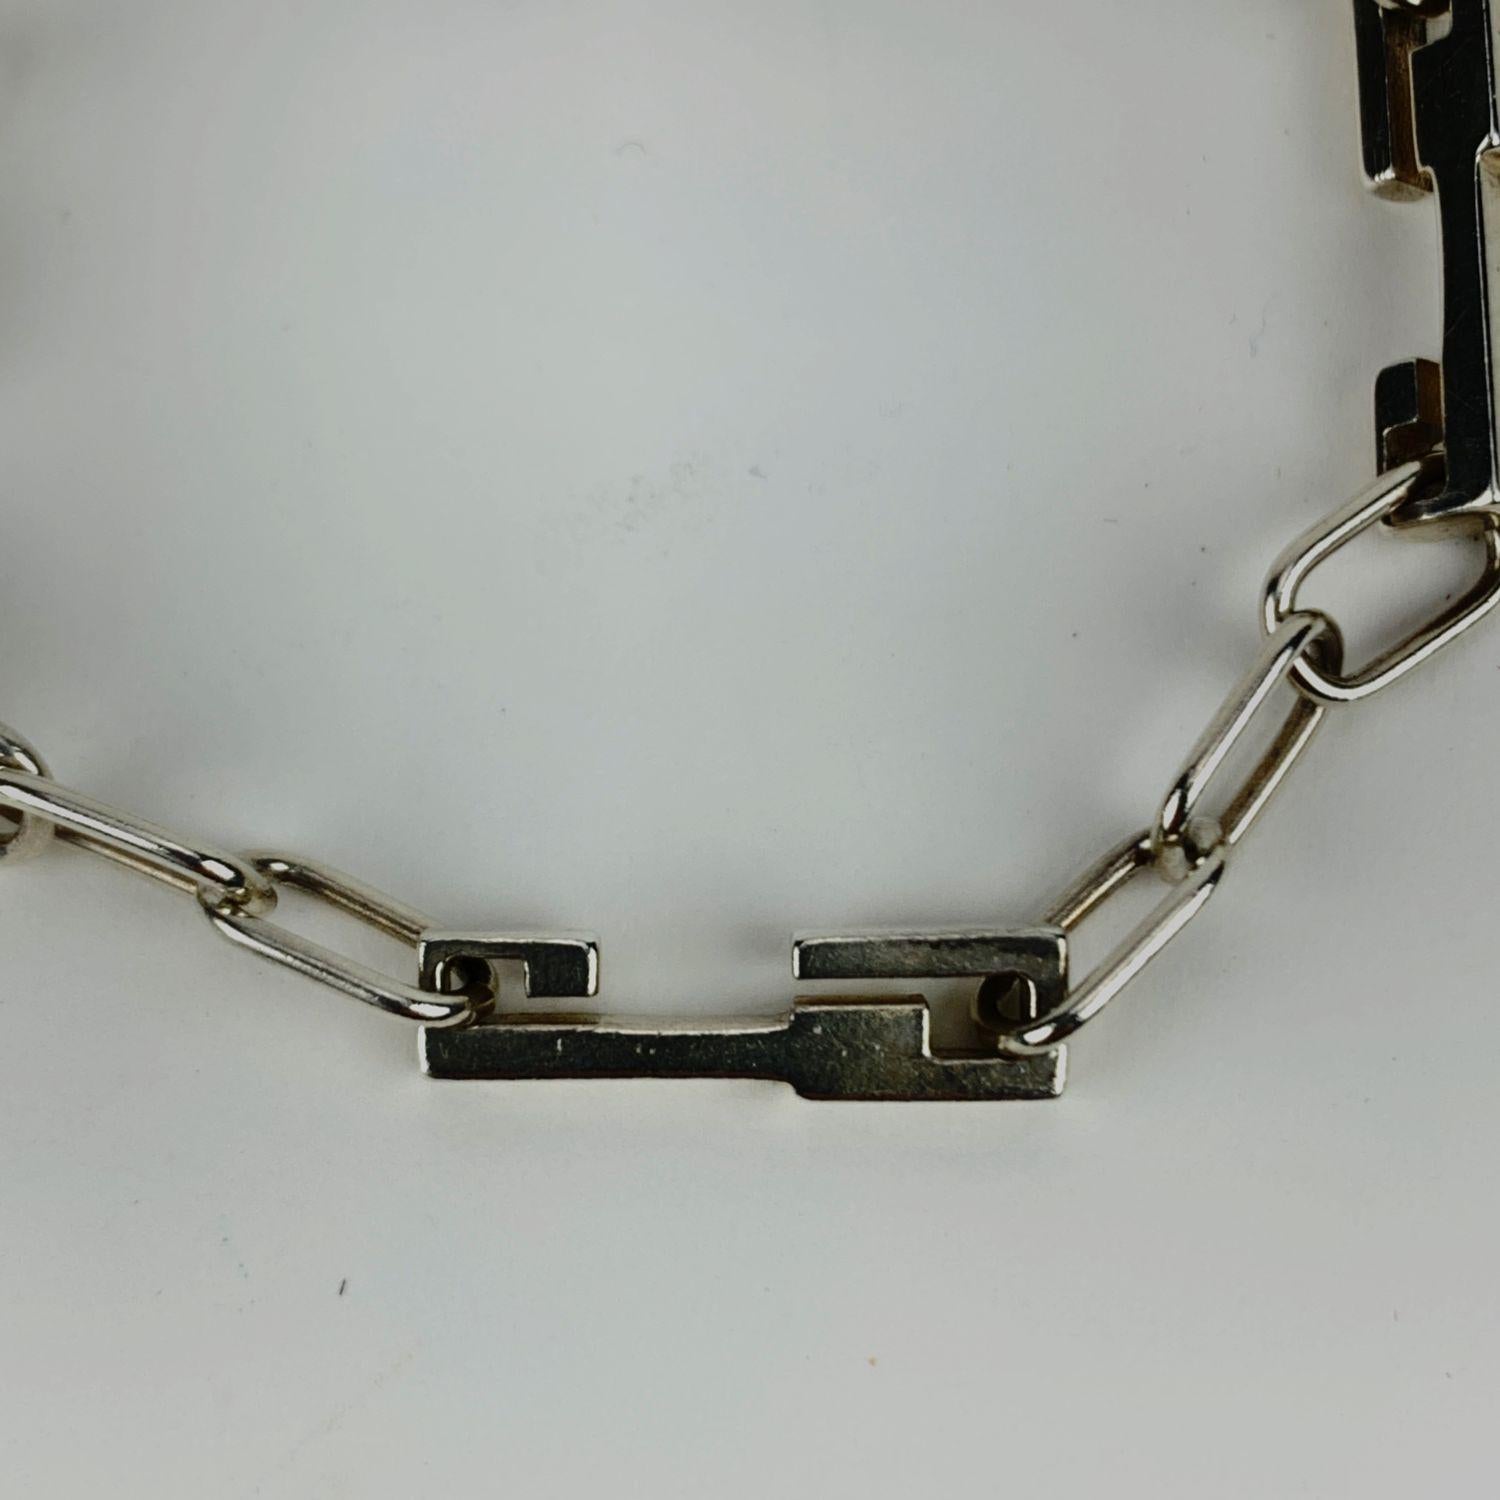 Classic chain bracelet by Gucci. Made in sterling silver. Lobster closure. Total length: 7 inches - 17,8 cm. 'Gucci made in Italy' engraved on the closure

Condition

A - EXCELLENT

Gently used. Light surface scratches due to normal use. Please,